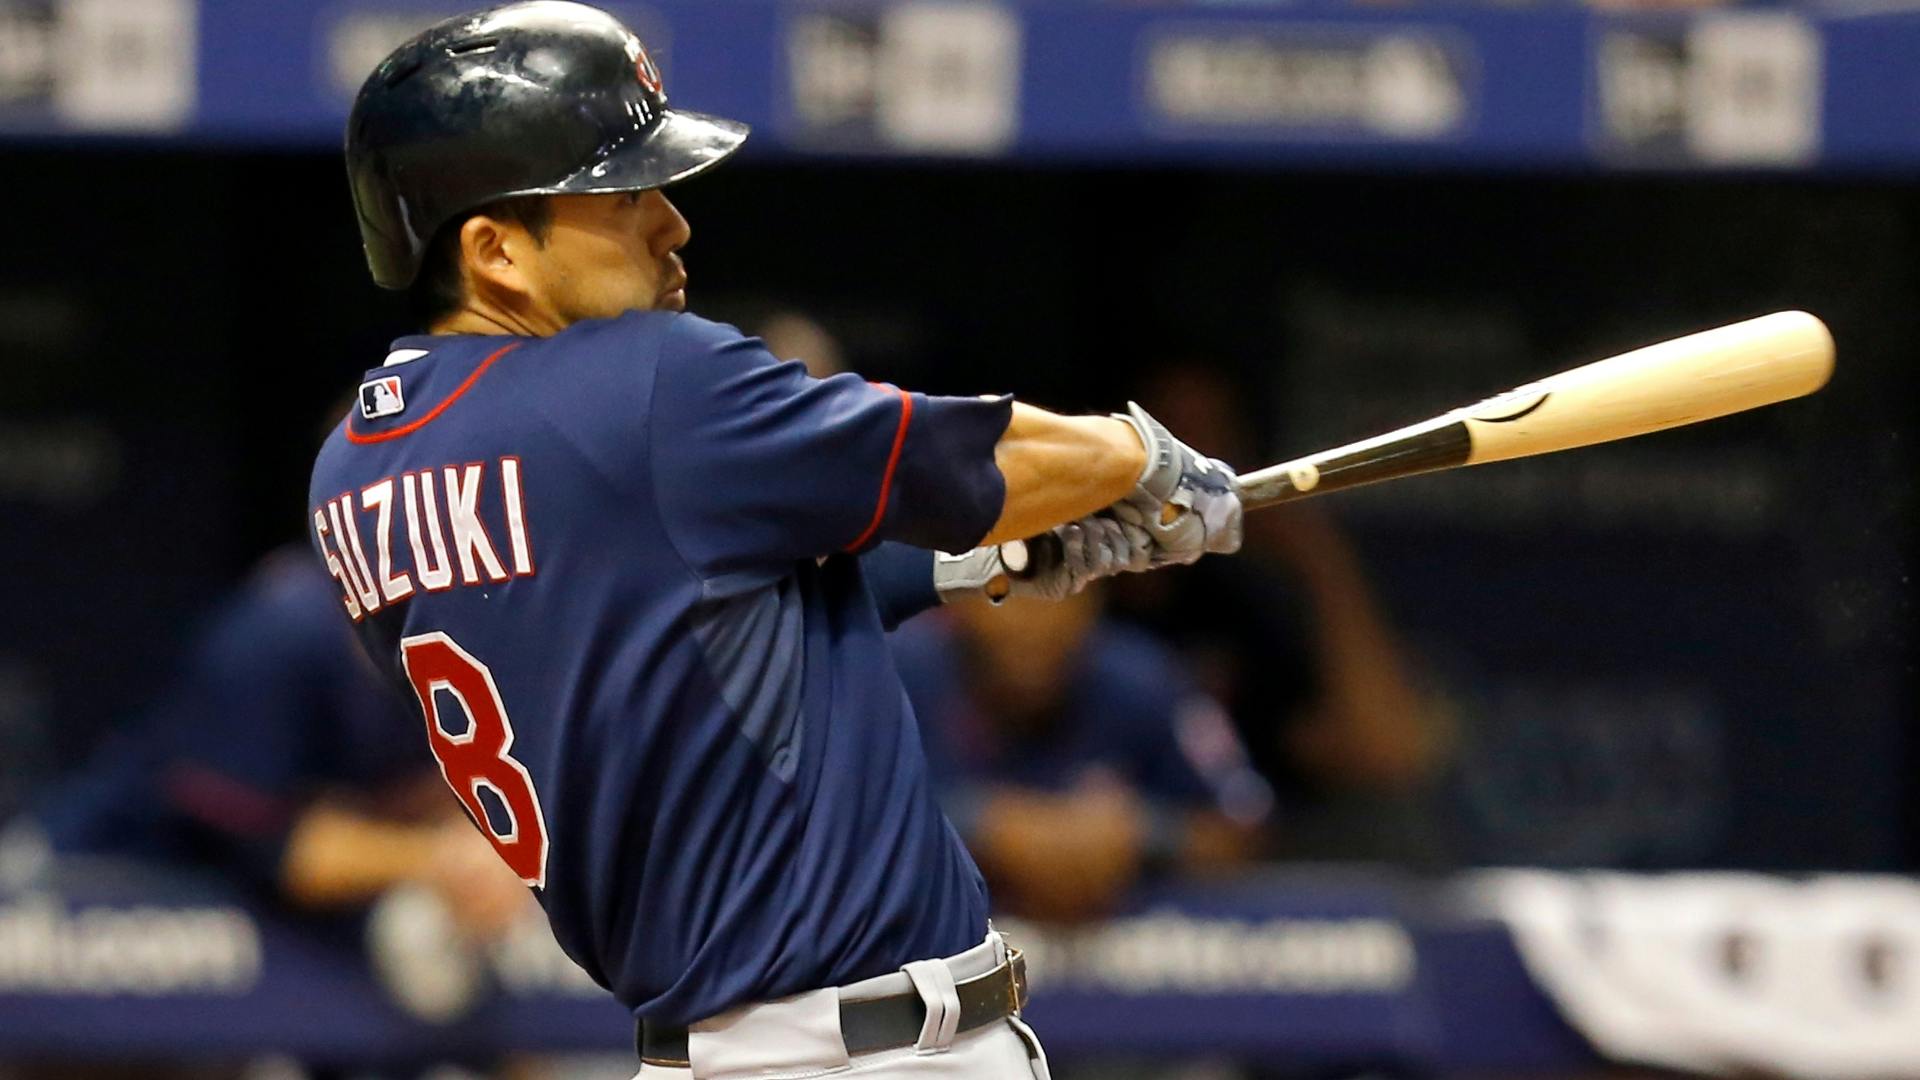 Kurt Suzuki's mistake allowed the winning run to score in Thursday's loss to the Rays, but it was still a successful road trip.